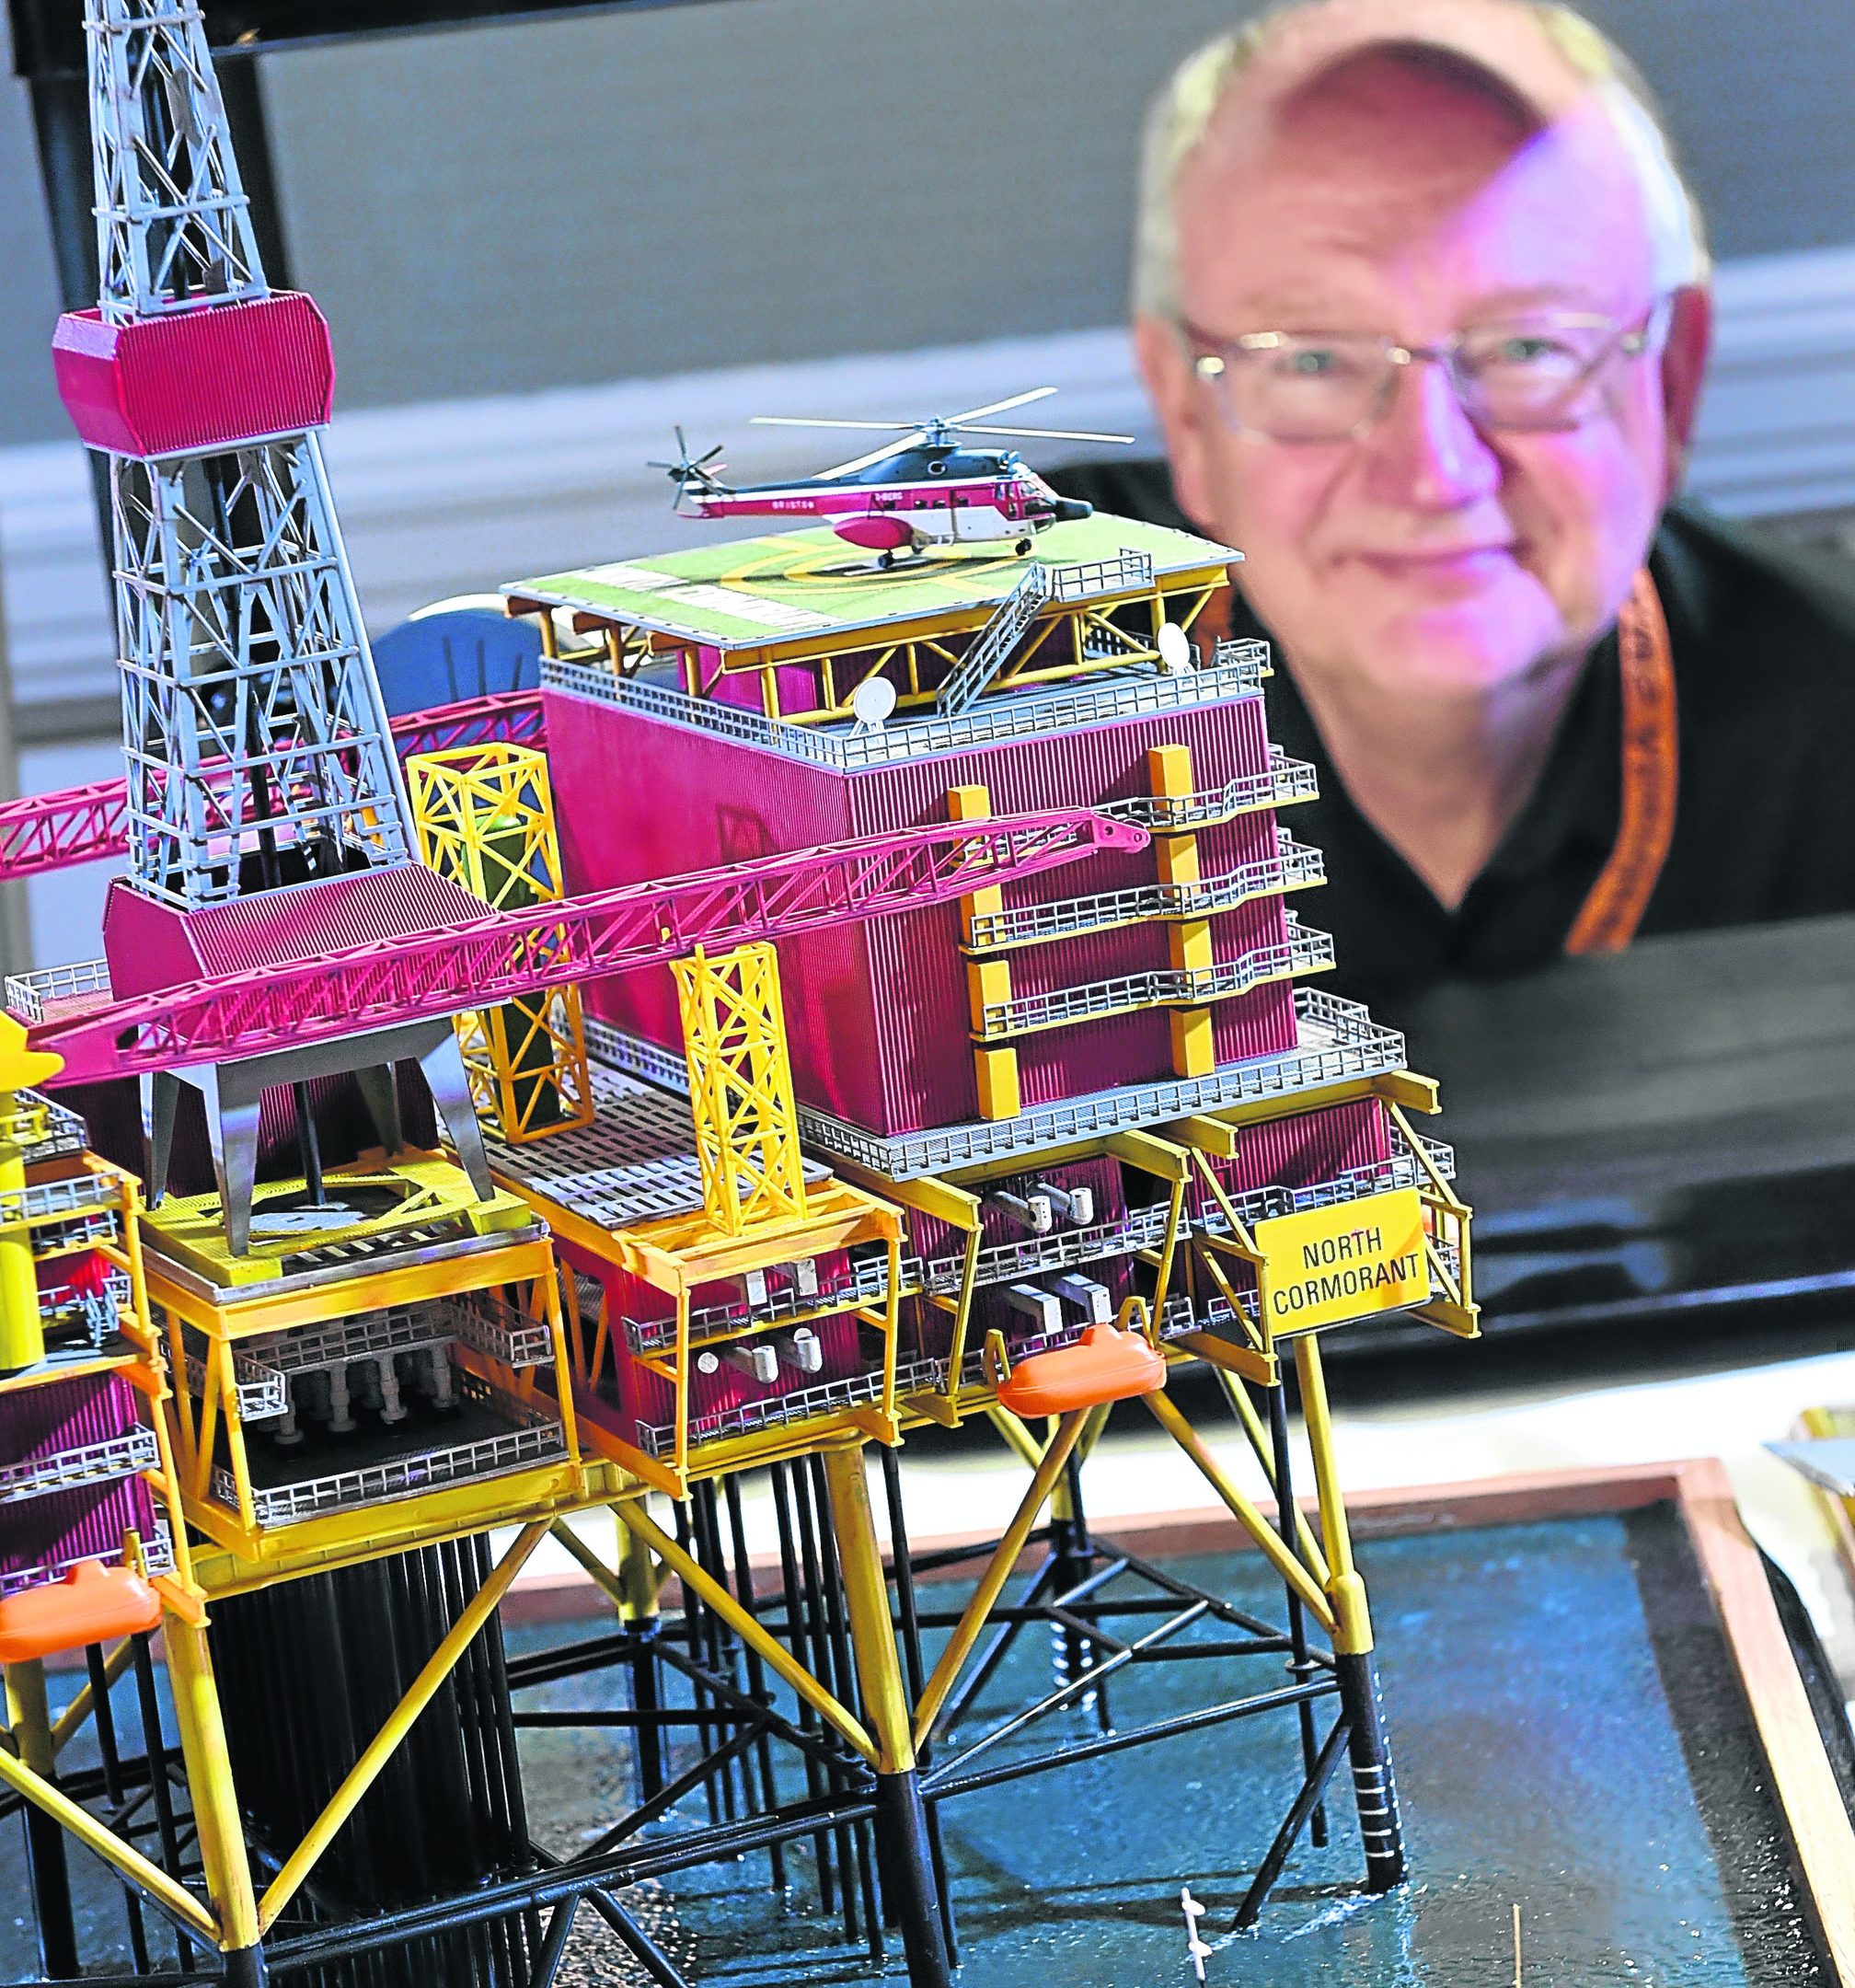 AMS Chairman George Scott with the club's model of the oil rig, North Cormorant .